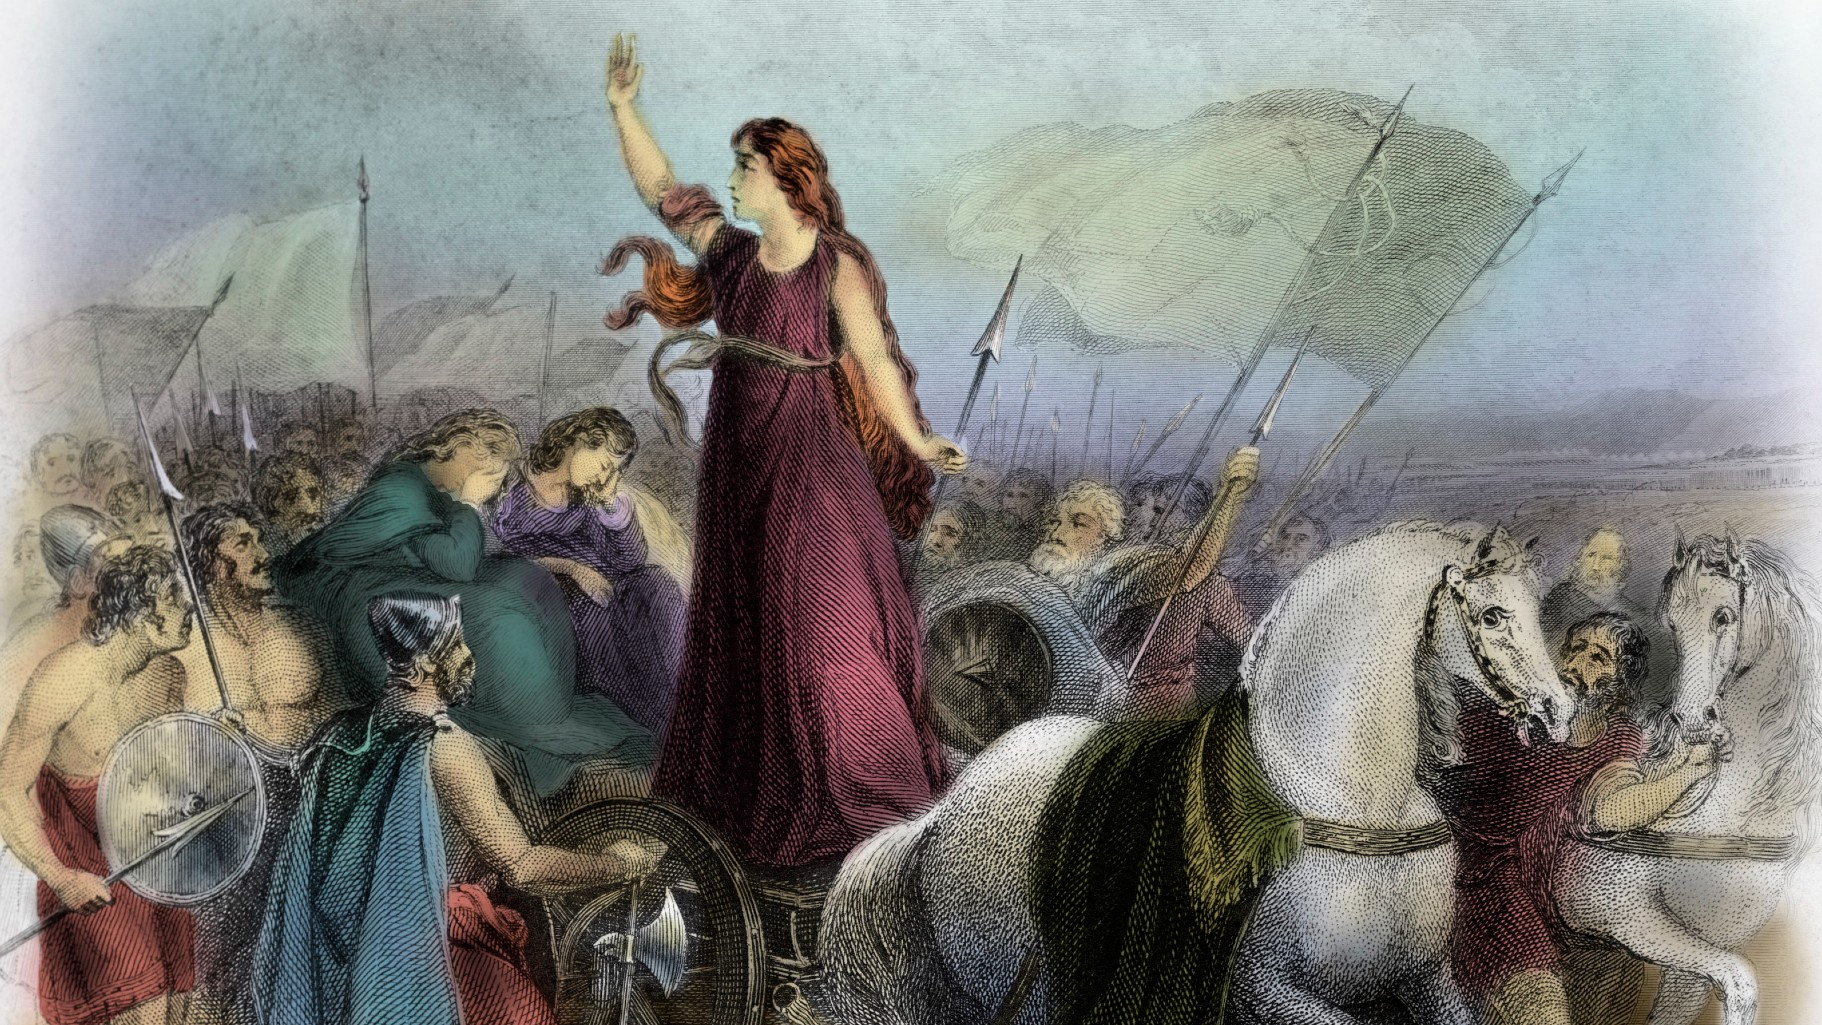 Boudica addresses her soldiers